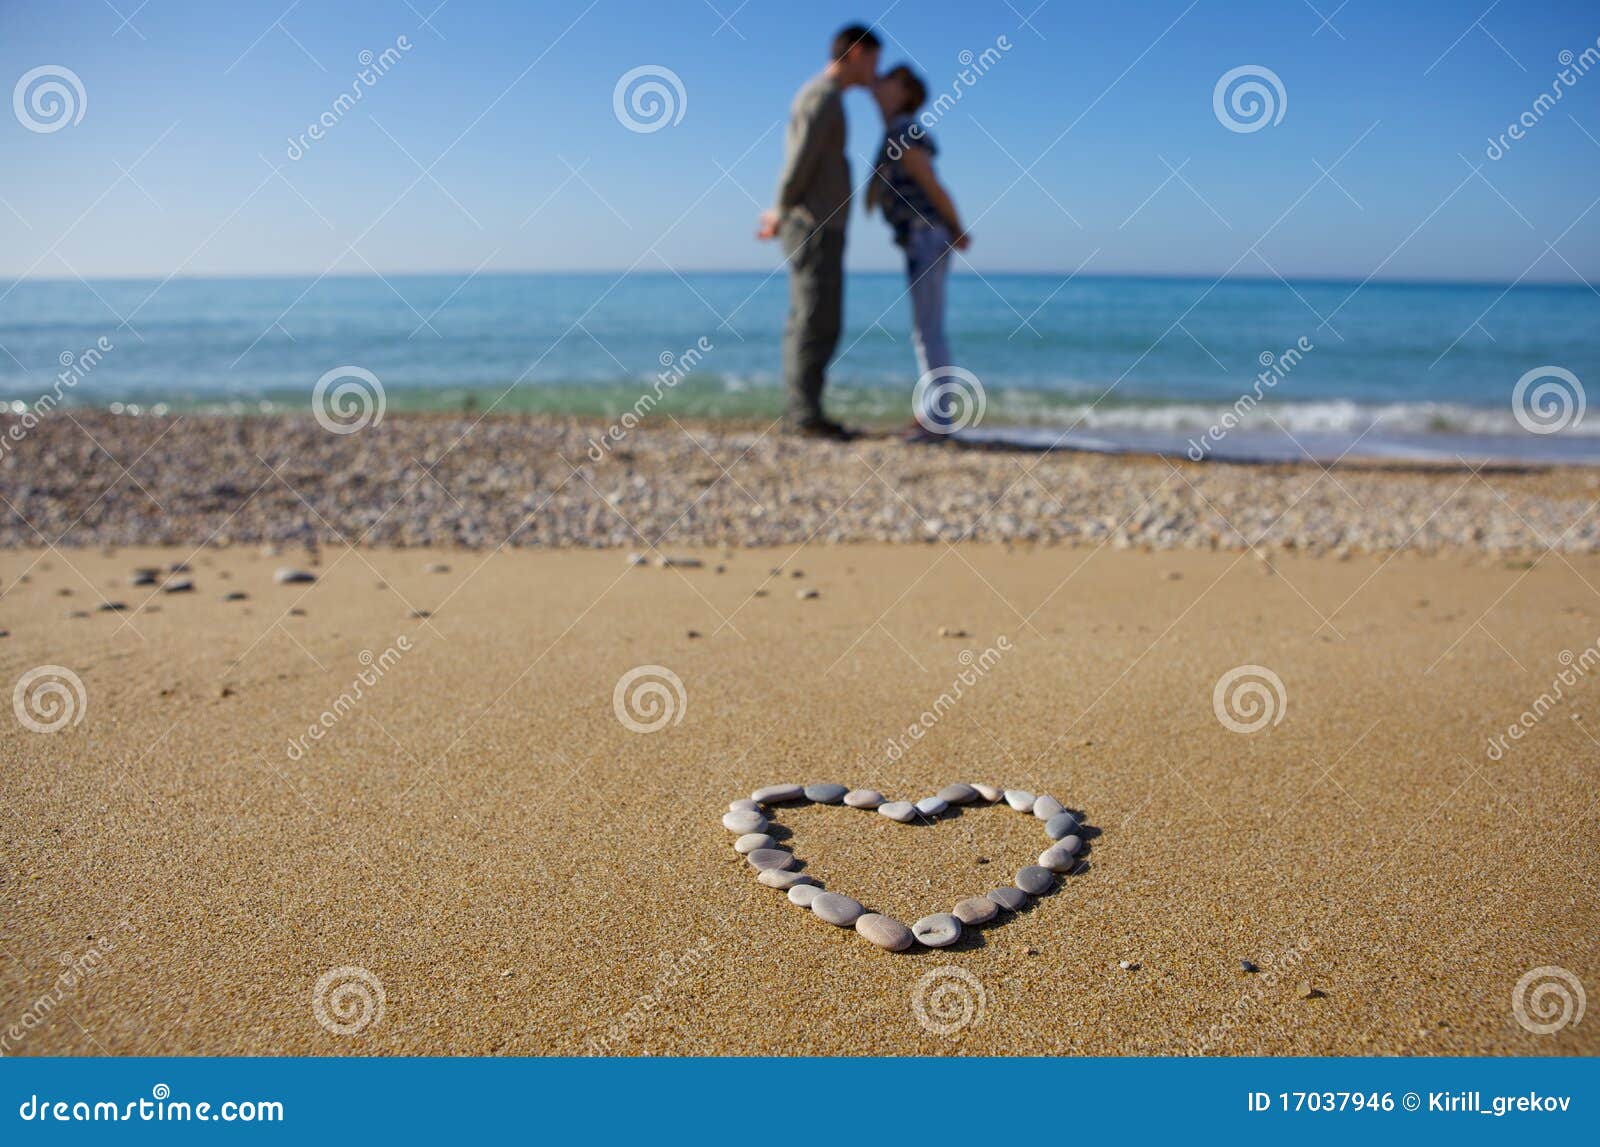 Pictures Of Lovers On The Beach